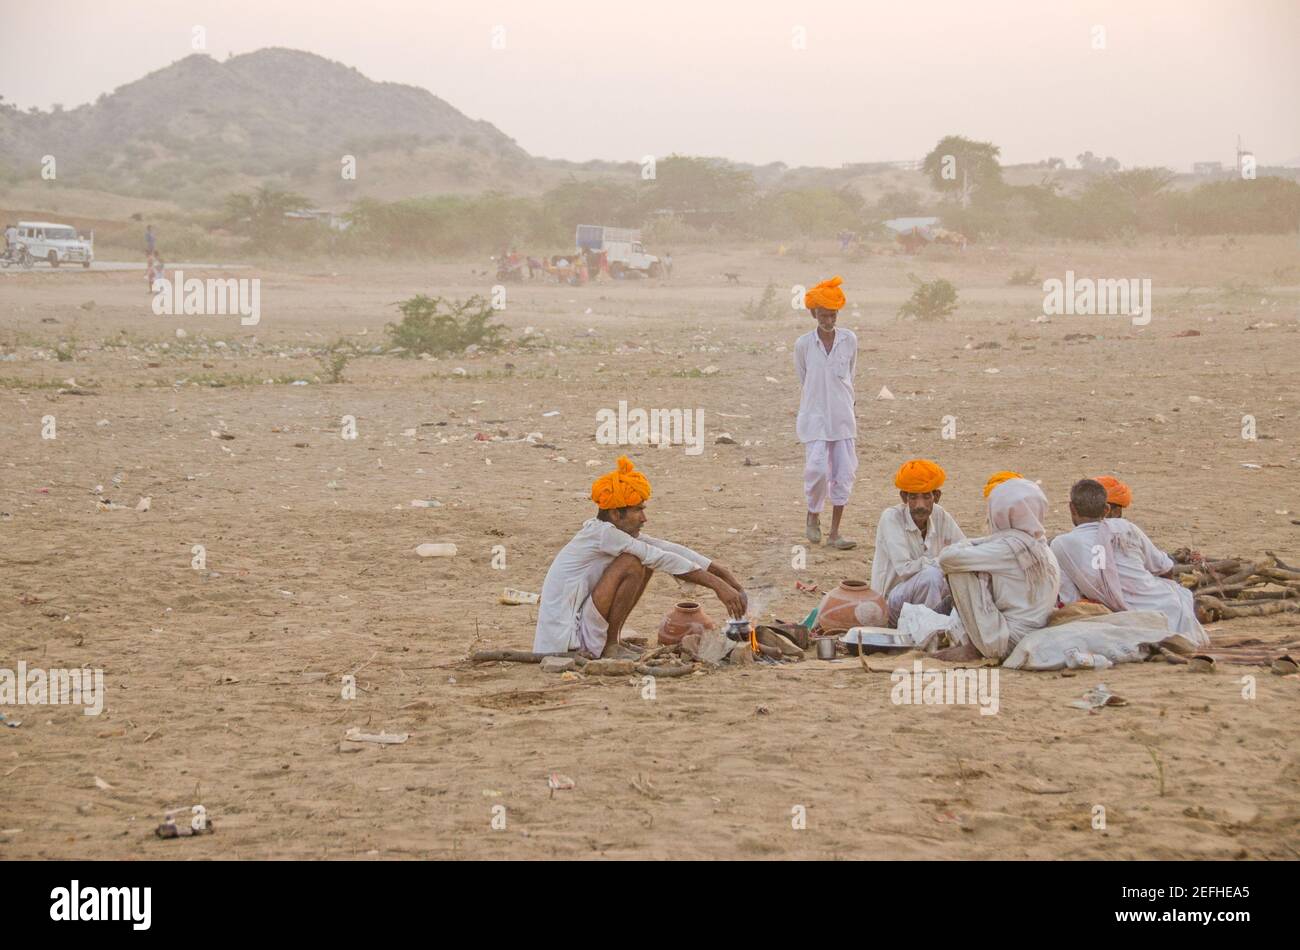 During the Pushkar fair, a group of camel handlers are sitting on the fair grounds in the evening sun. The orange turban on their heads is bright. Stock Photo